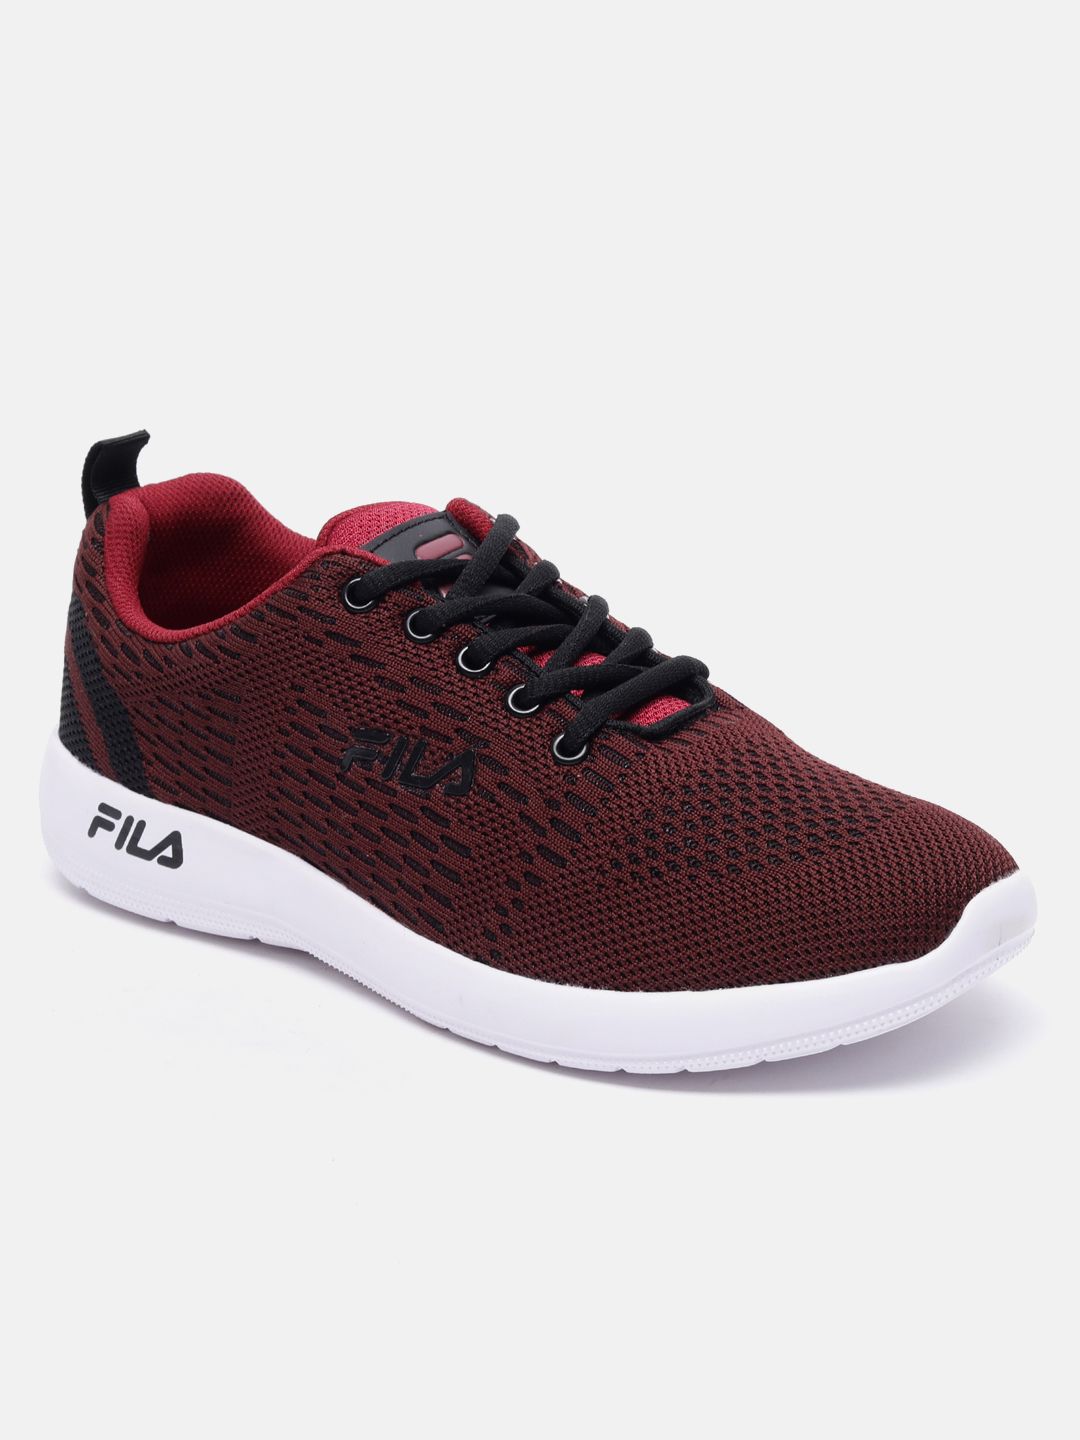 Sheepskin Boots & Shearling - pink Fila sneakers - Lined lace Shoes: What  Changes Are Coming – Rvce News